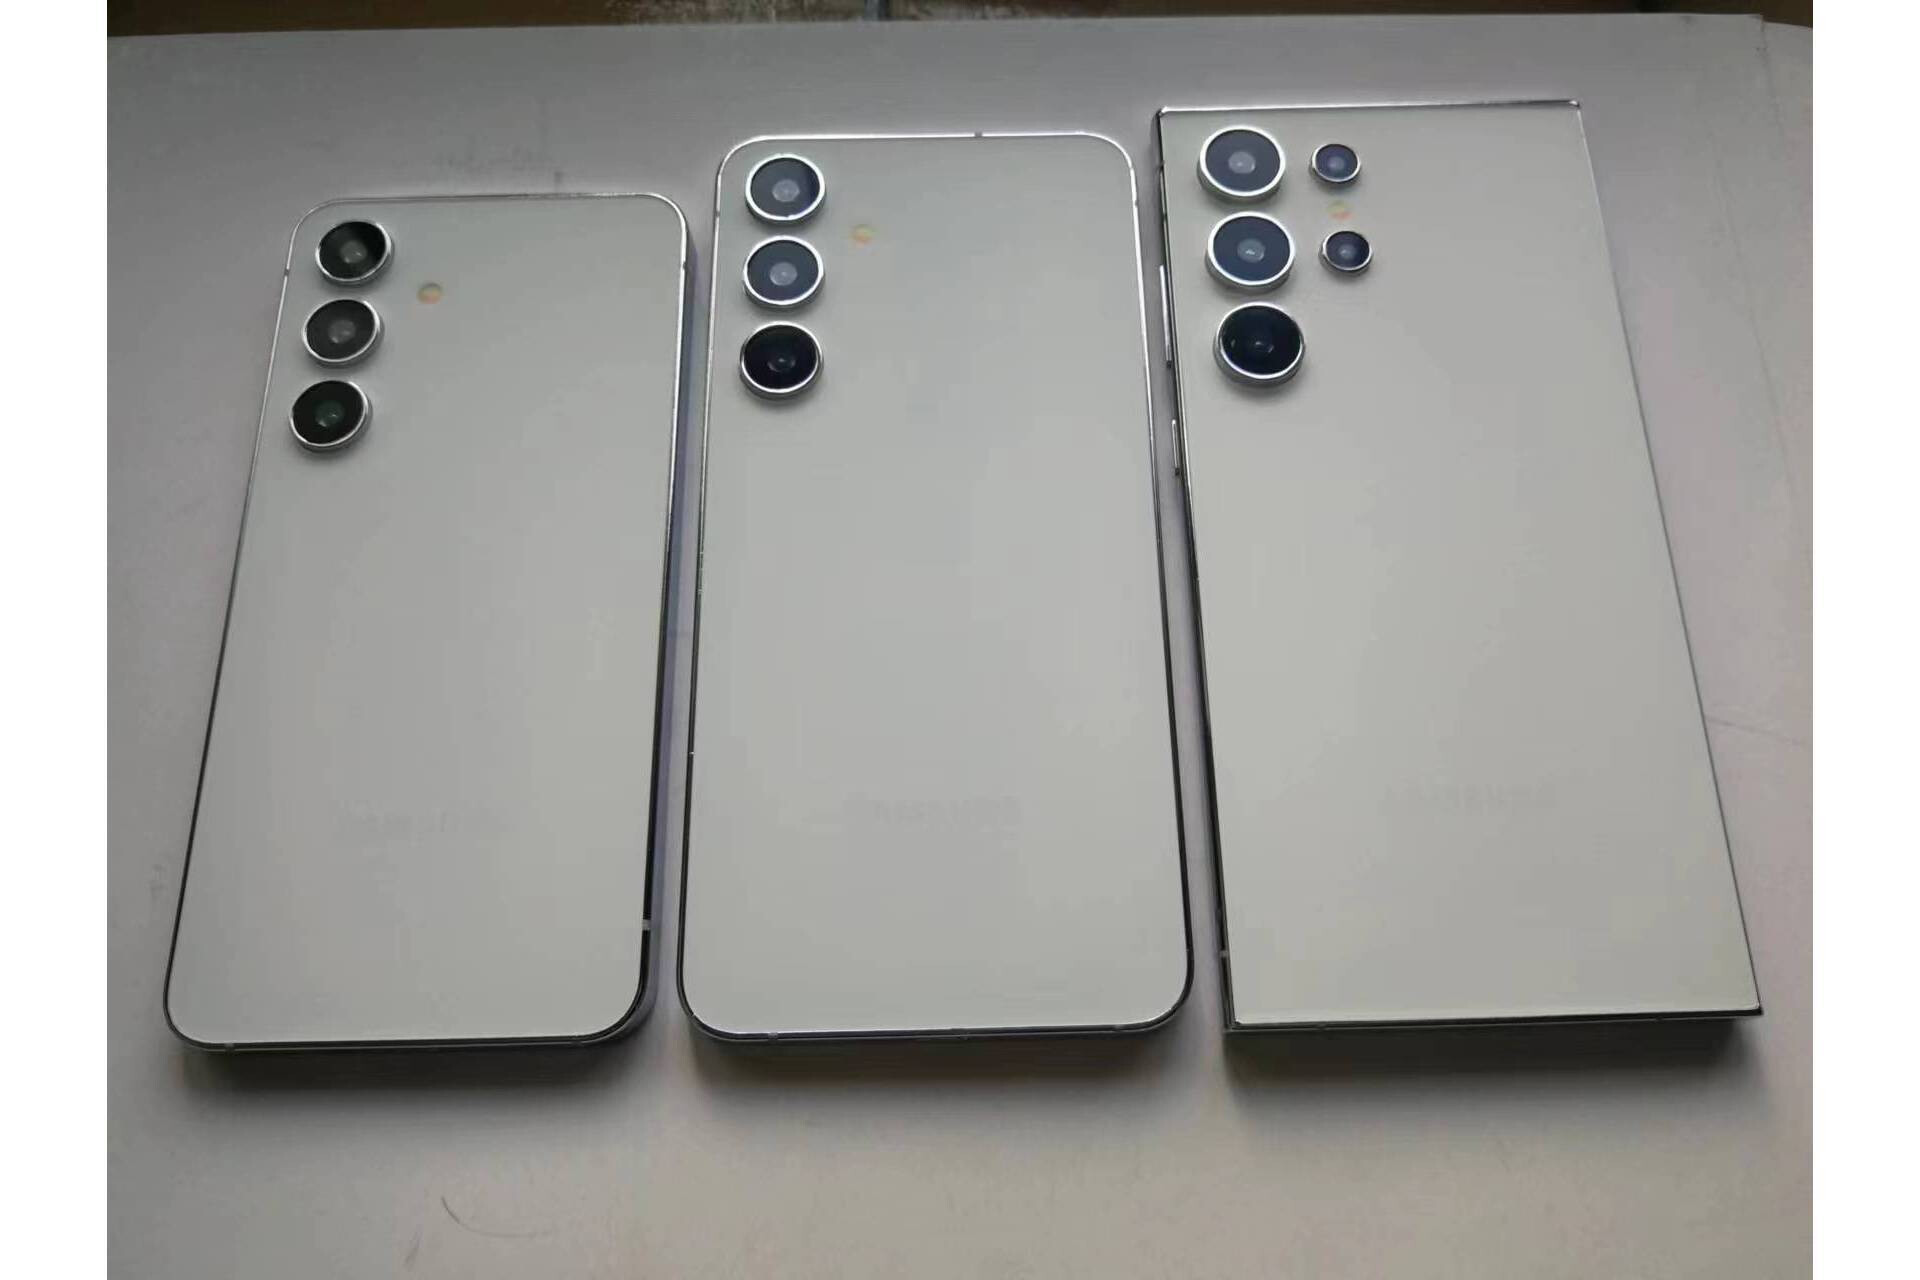 Galaxy S24 family dummies - Leak gives first comprehensive look at Galaxy S24 family by way of dummy models